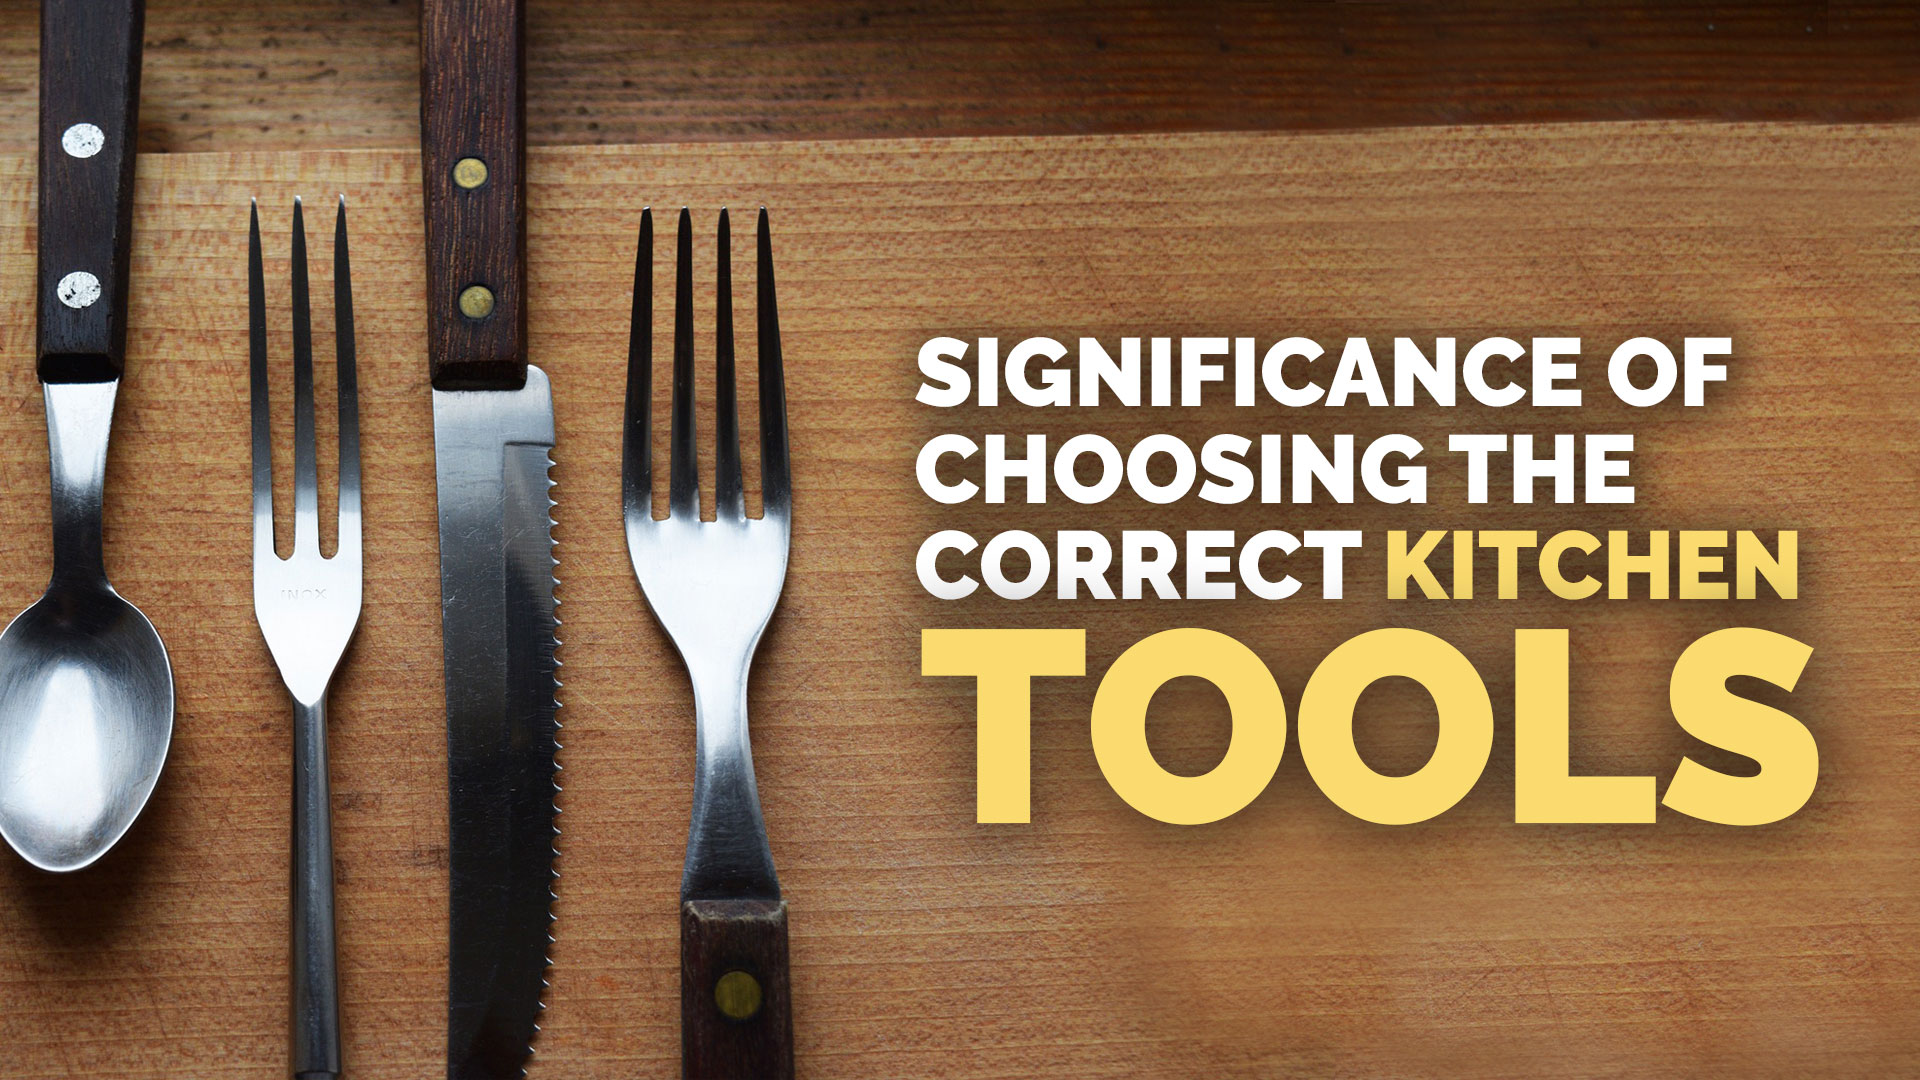 Significance of Choosing the Correct Kitchen Tools